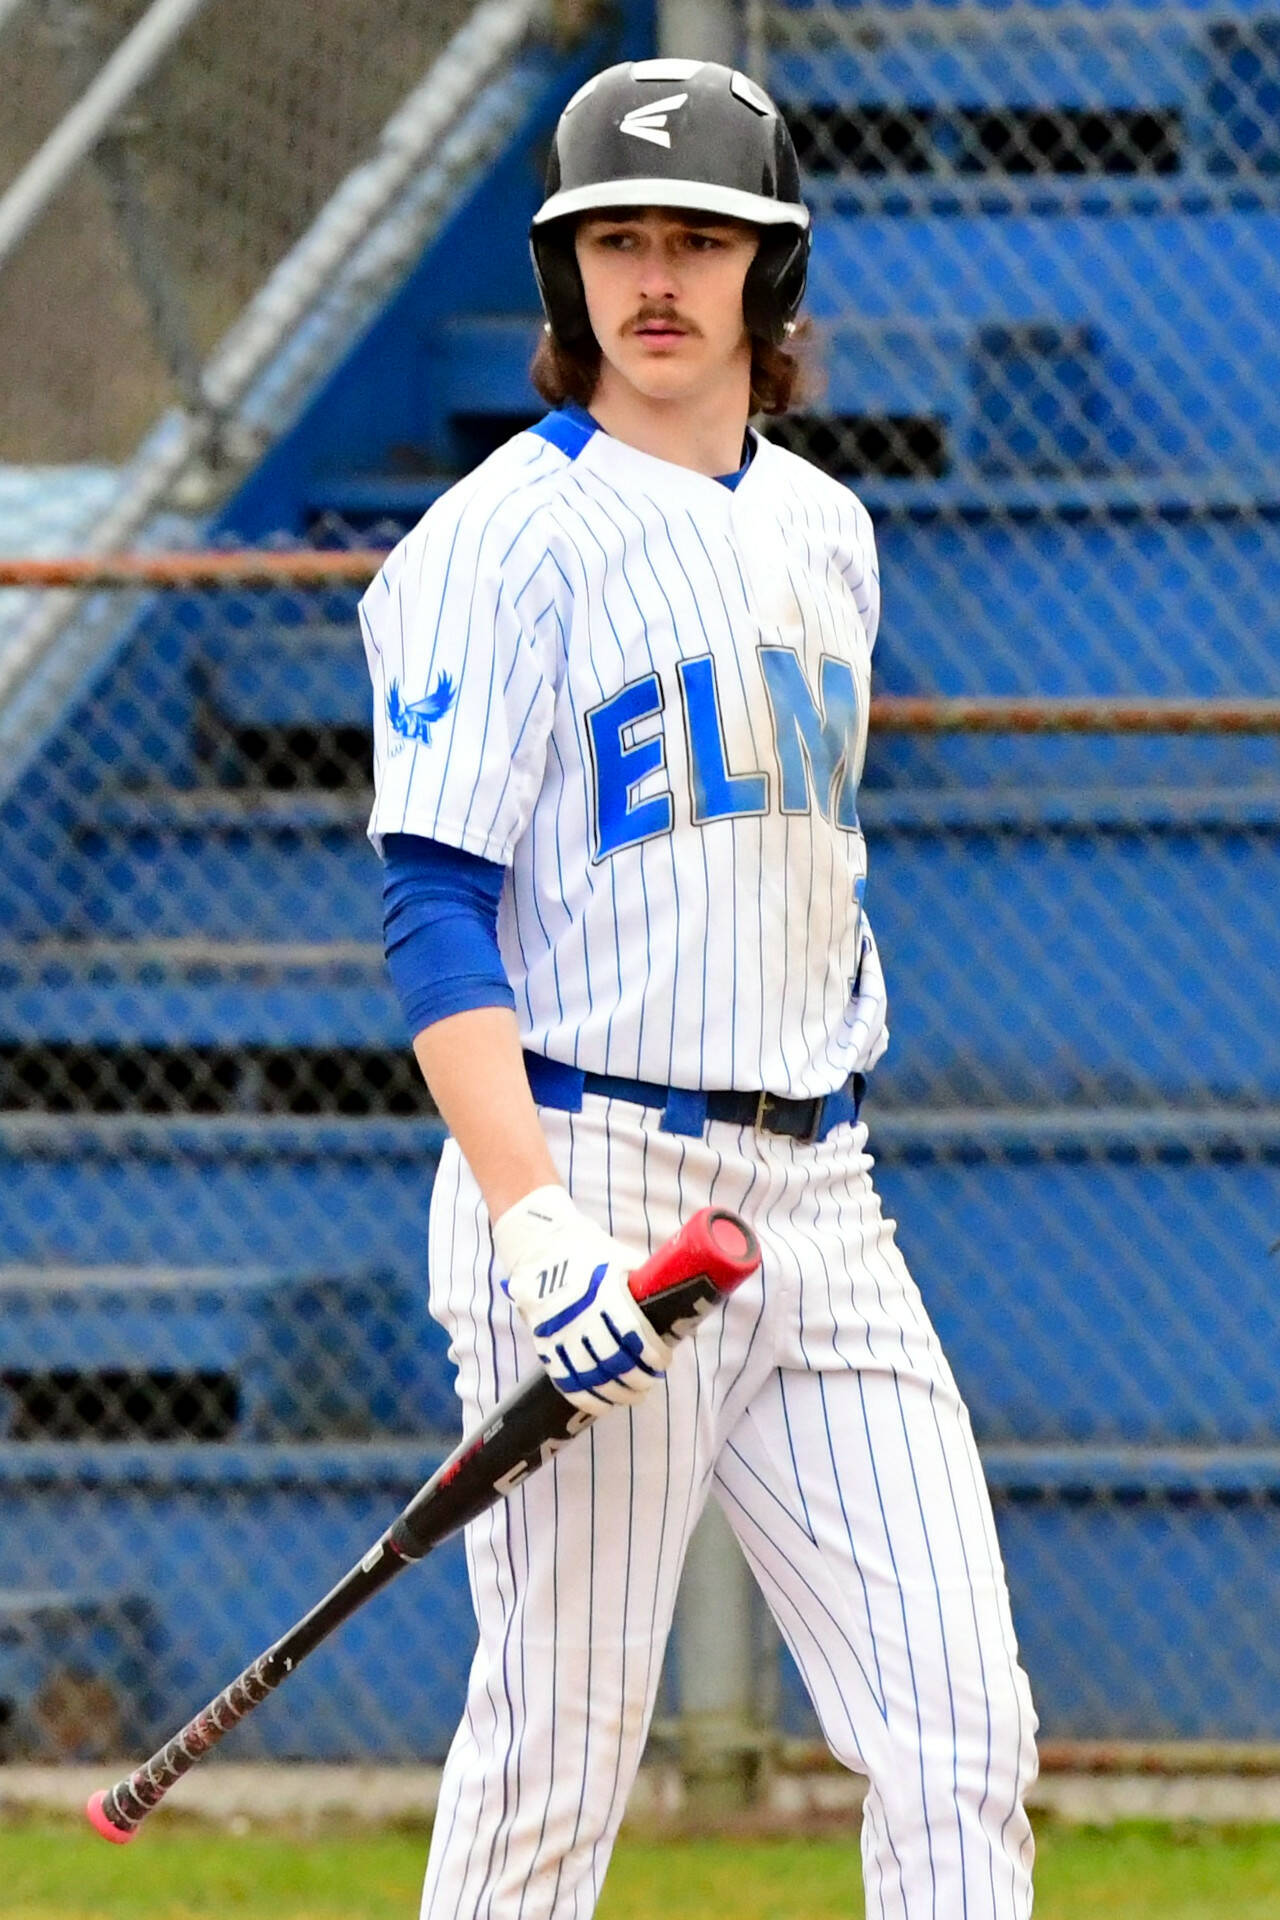 PHOTO BY CHRYSTAL WELD Elma’s Gibson Cain, seen here in a file photo, had three hits and drove in three runs in the Eagles’ 13-0 win over Eatonville on Thursday in Elma.